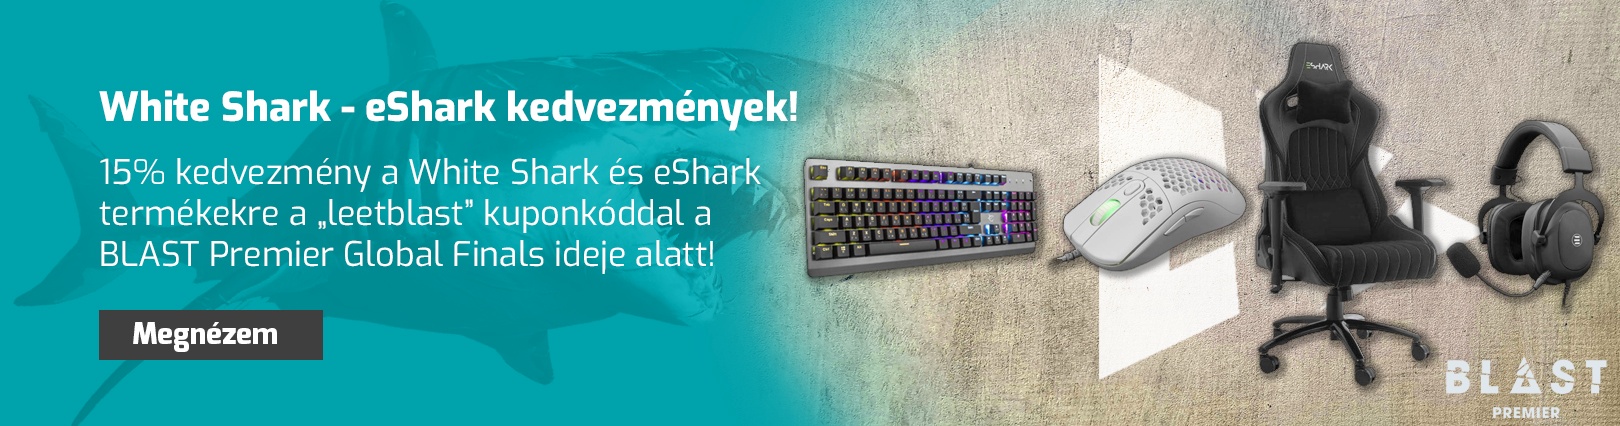 https://leetgaming.com/page/3/?s=Shark&post_type=product